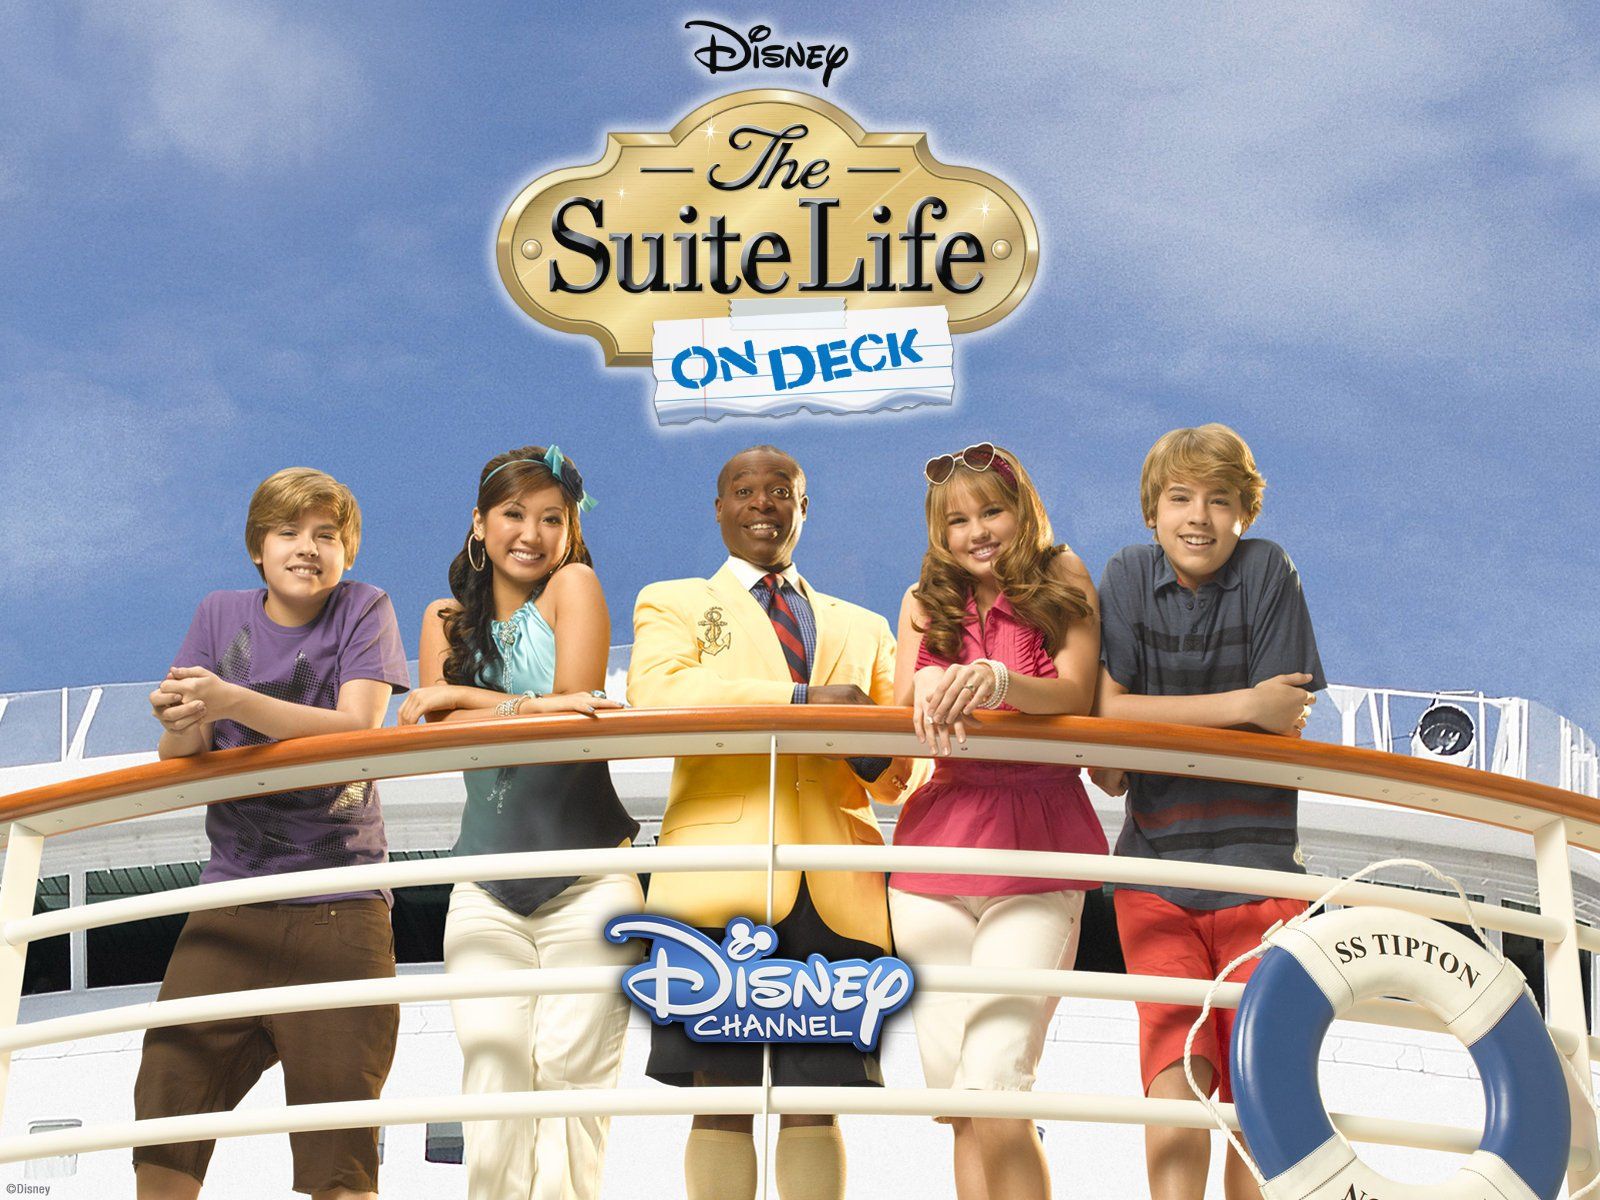 Watch The Suite Life On Deck Volume 3